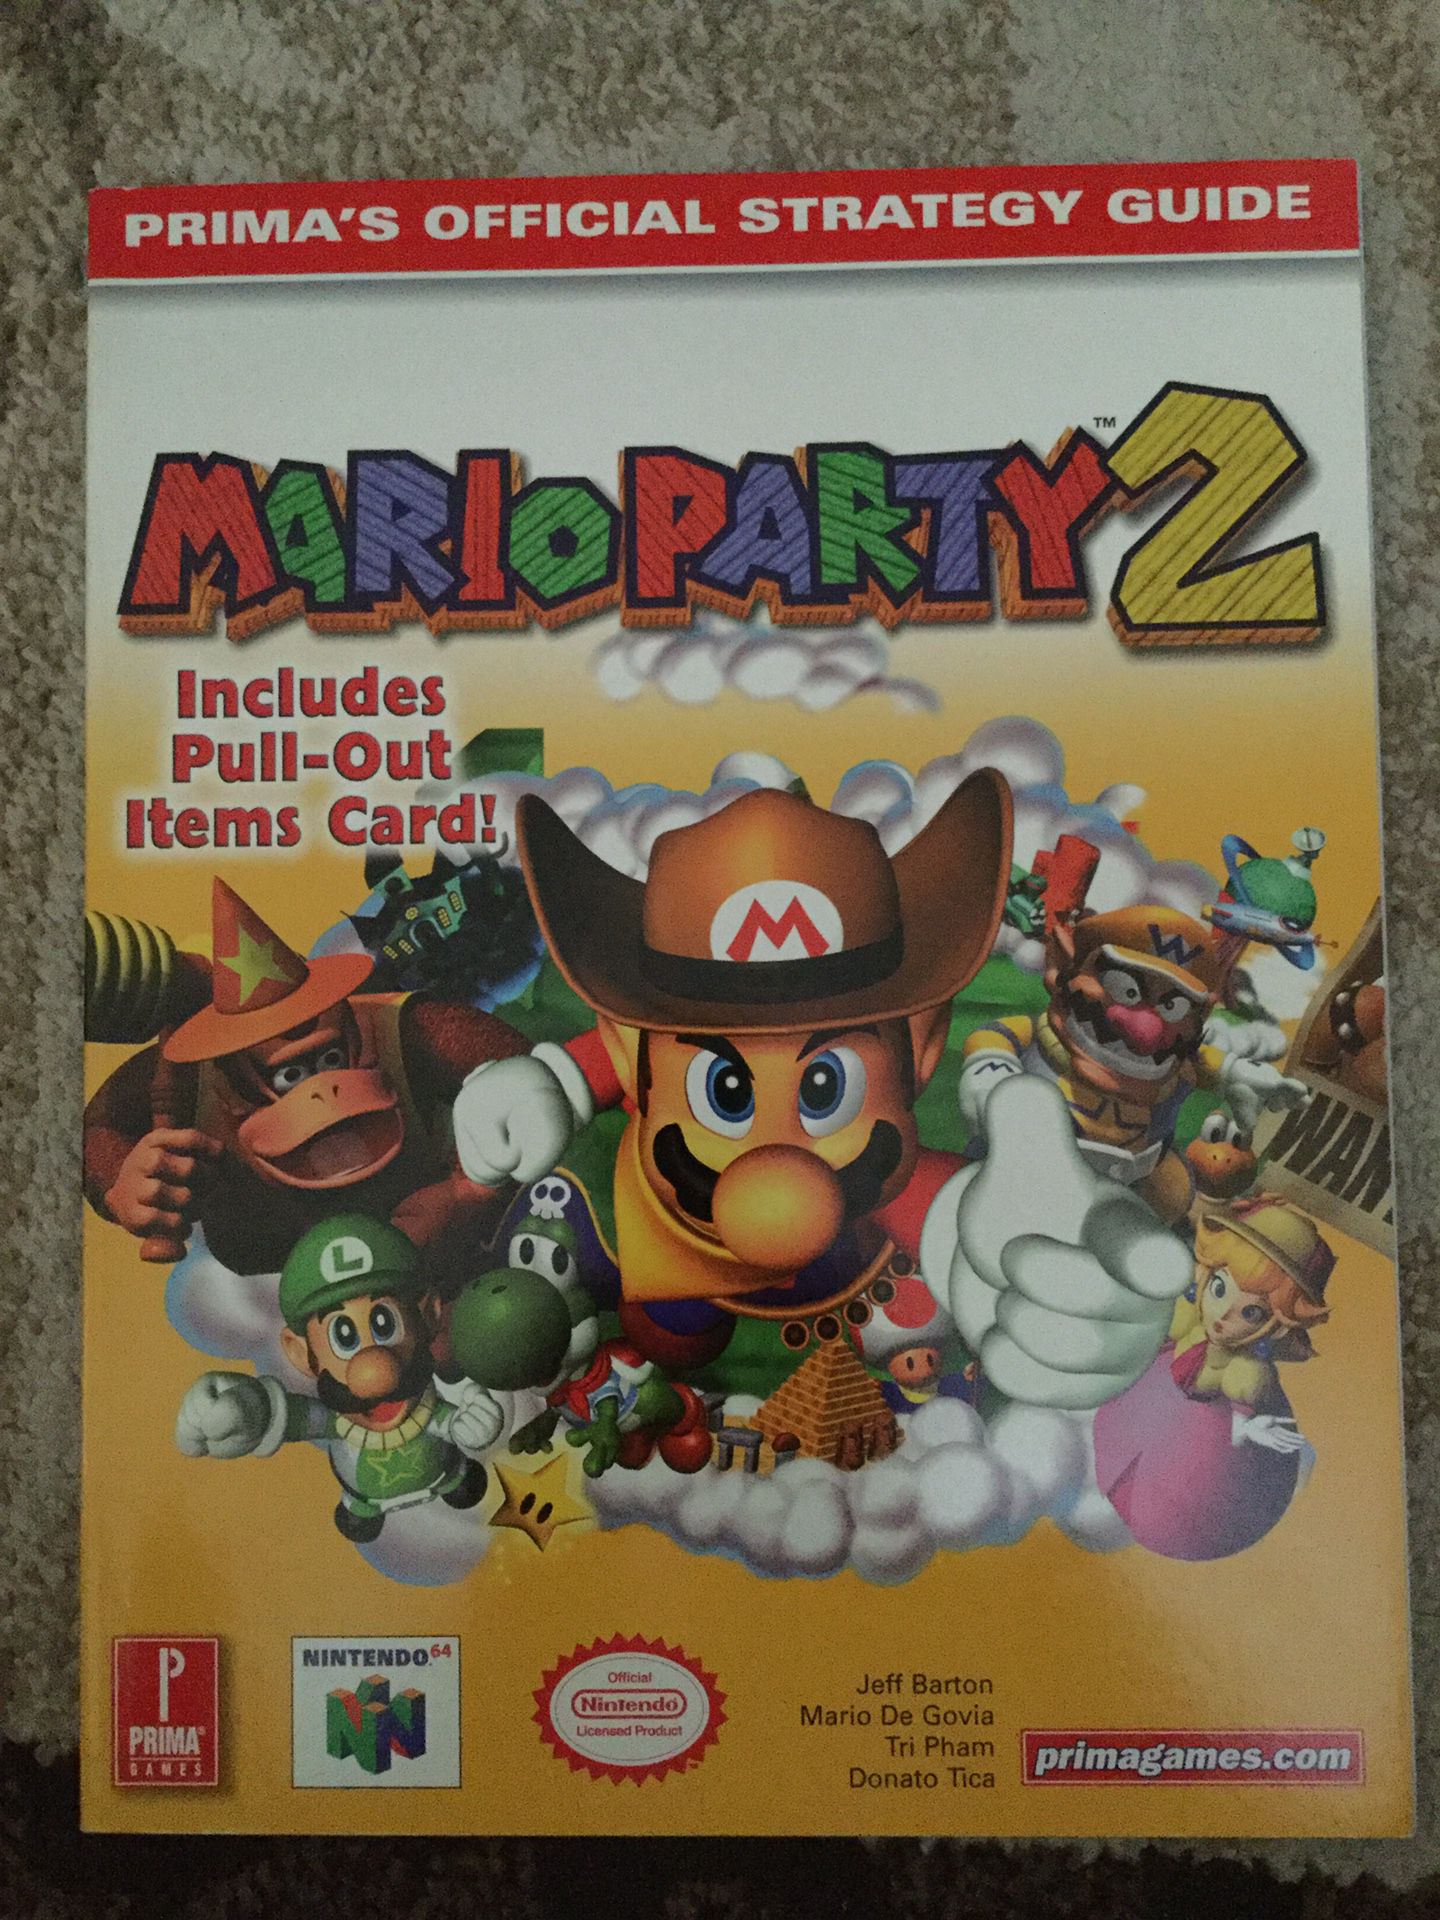 Prima Mario Party 2 players guide